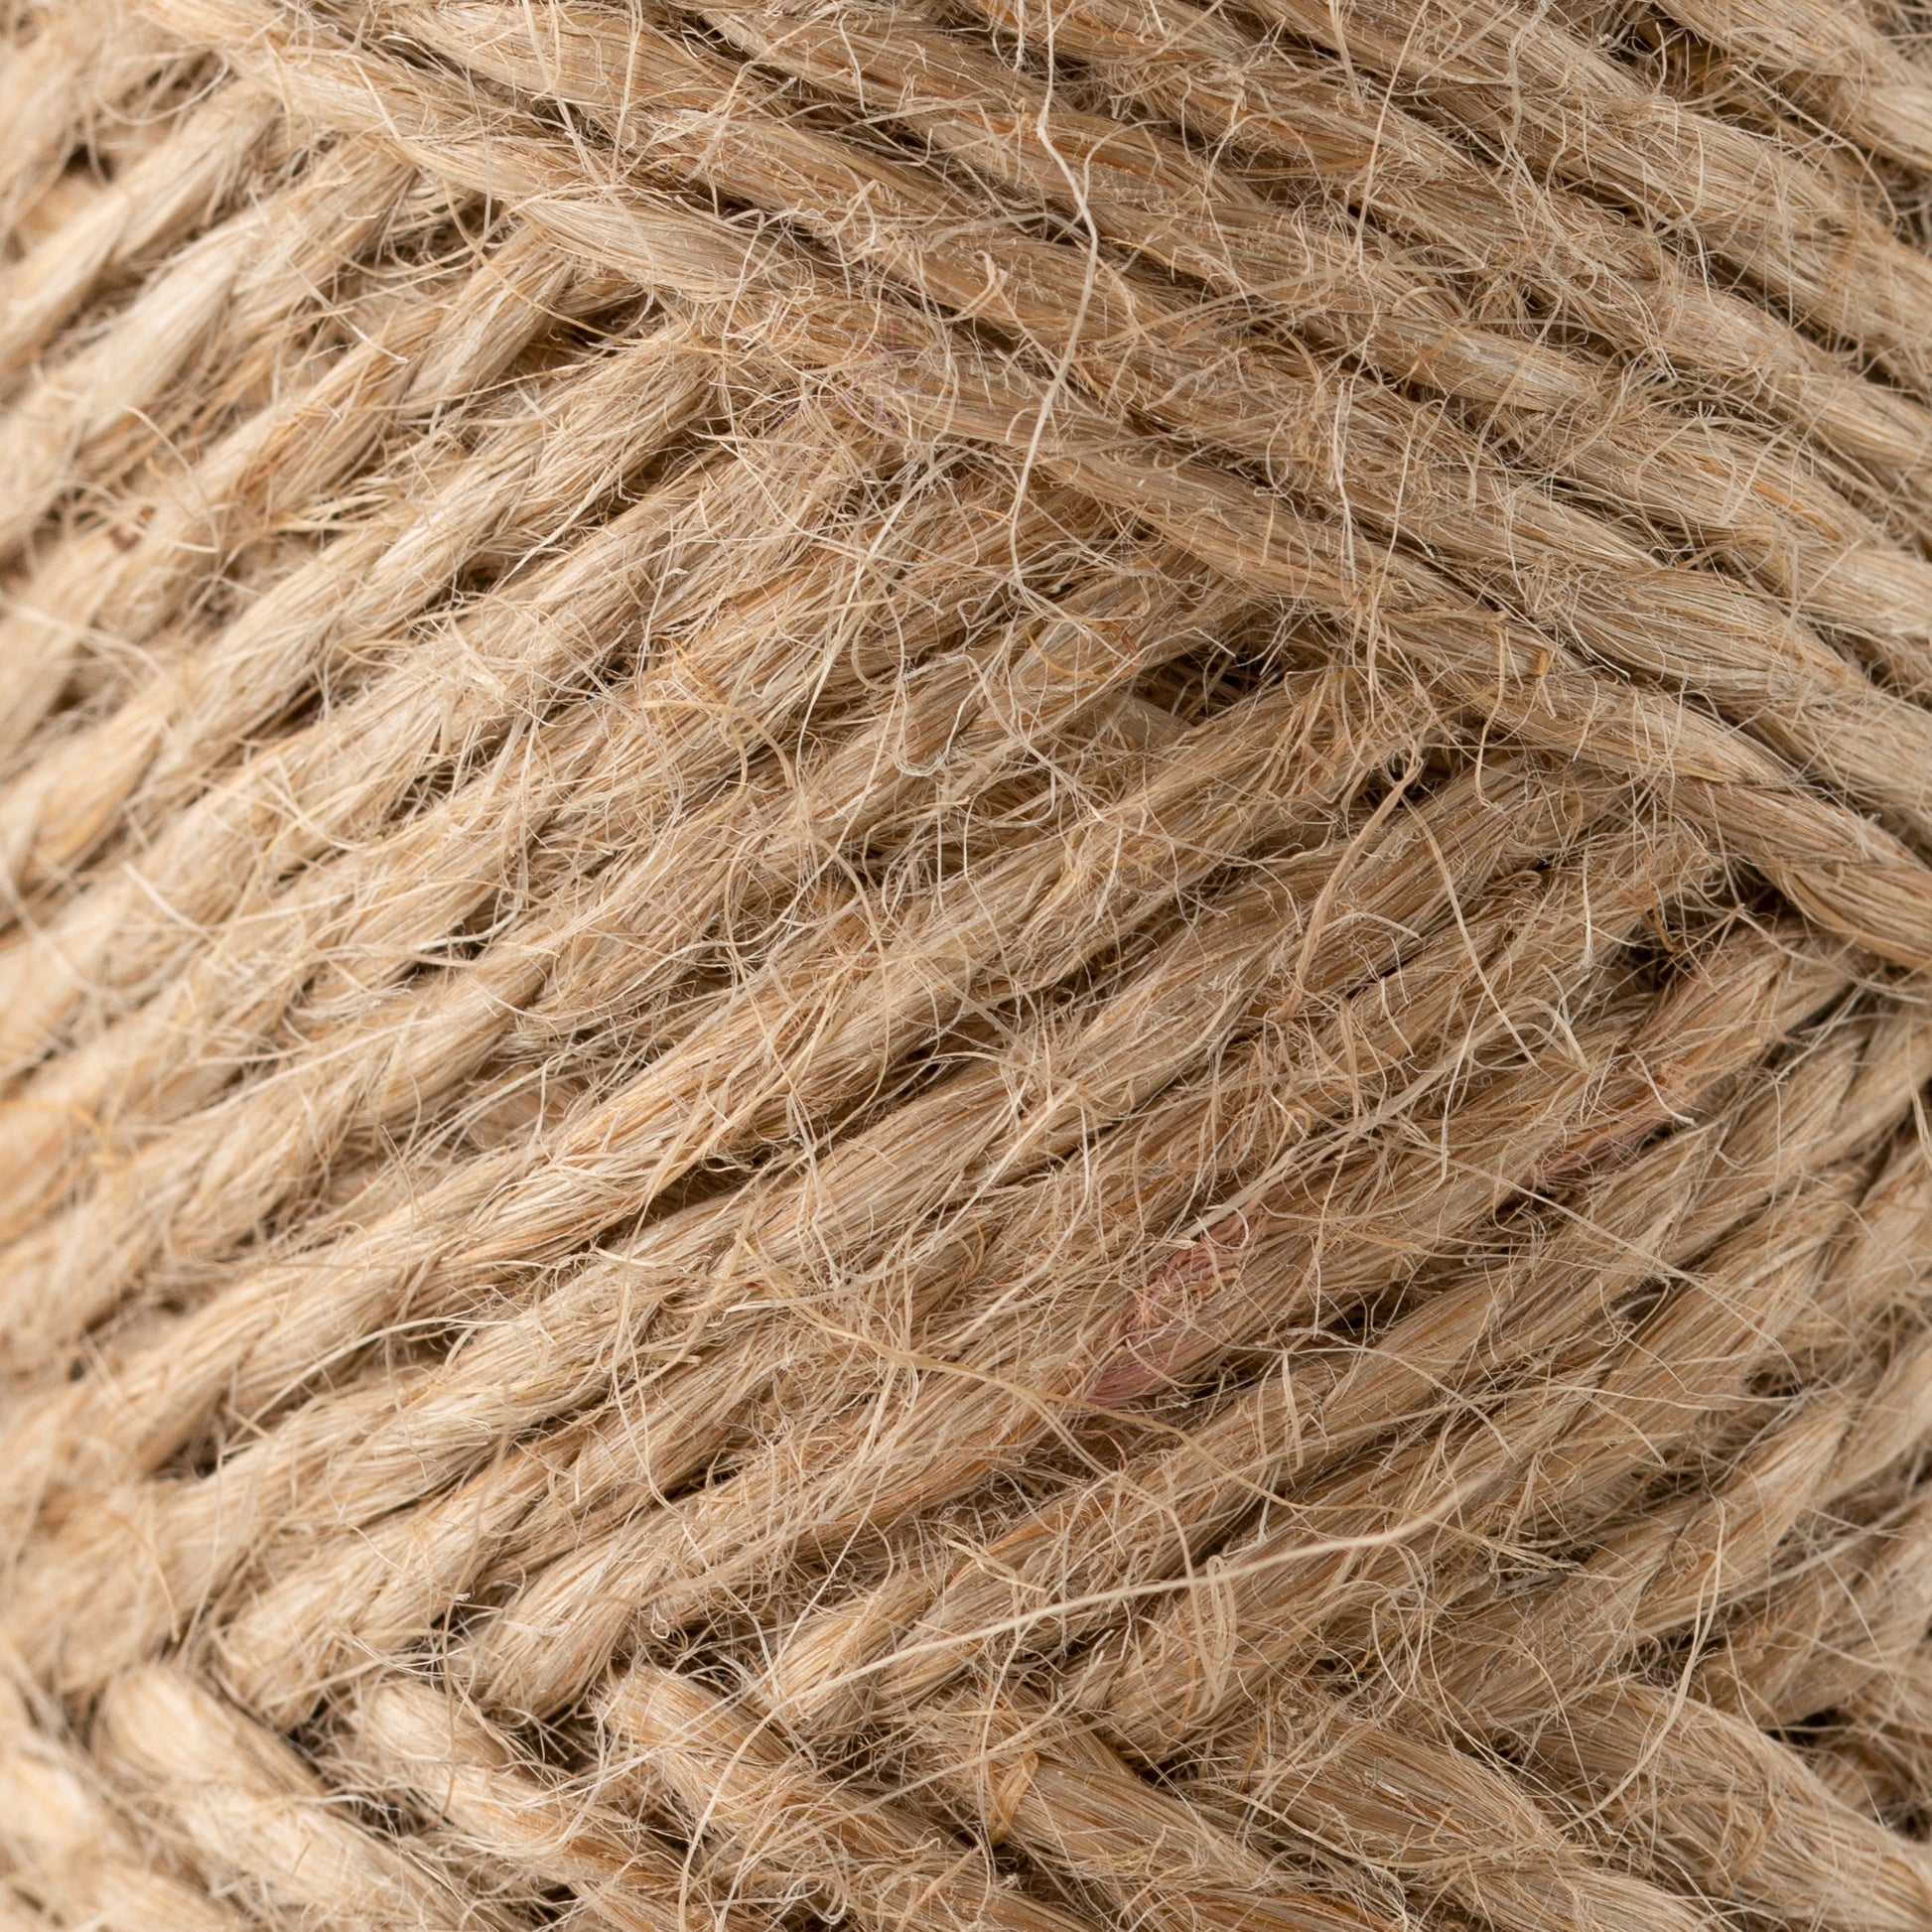 Sensy Premium Natural Jute Twine Best Arts Crafts Gift Twine Christmas Twine Durable Packing String (328 Feet)